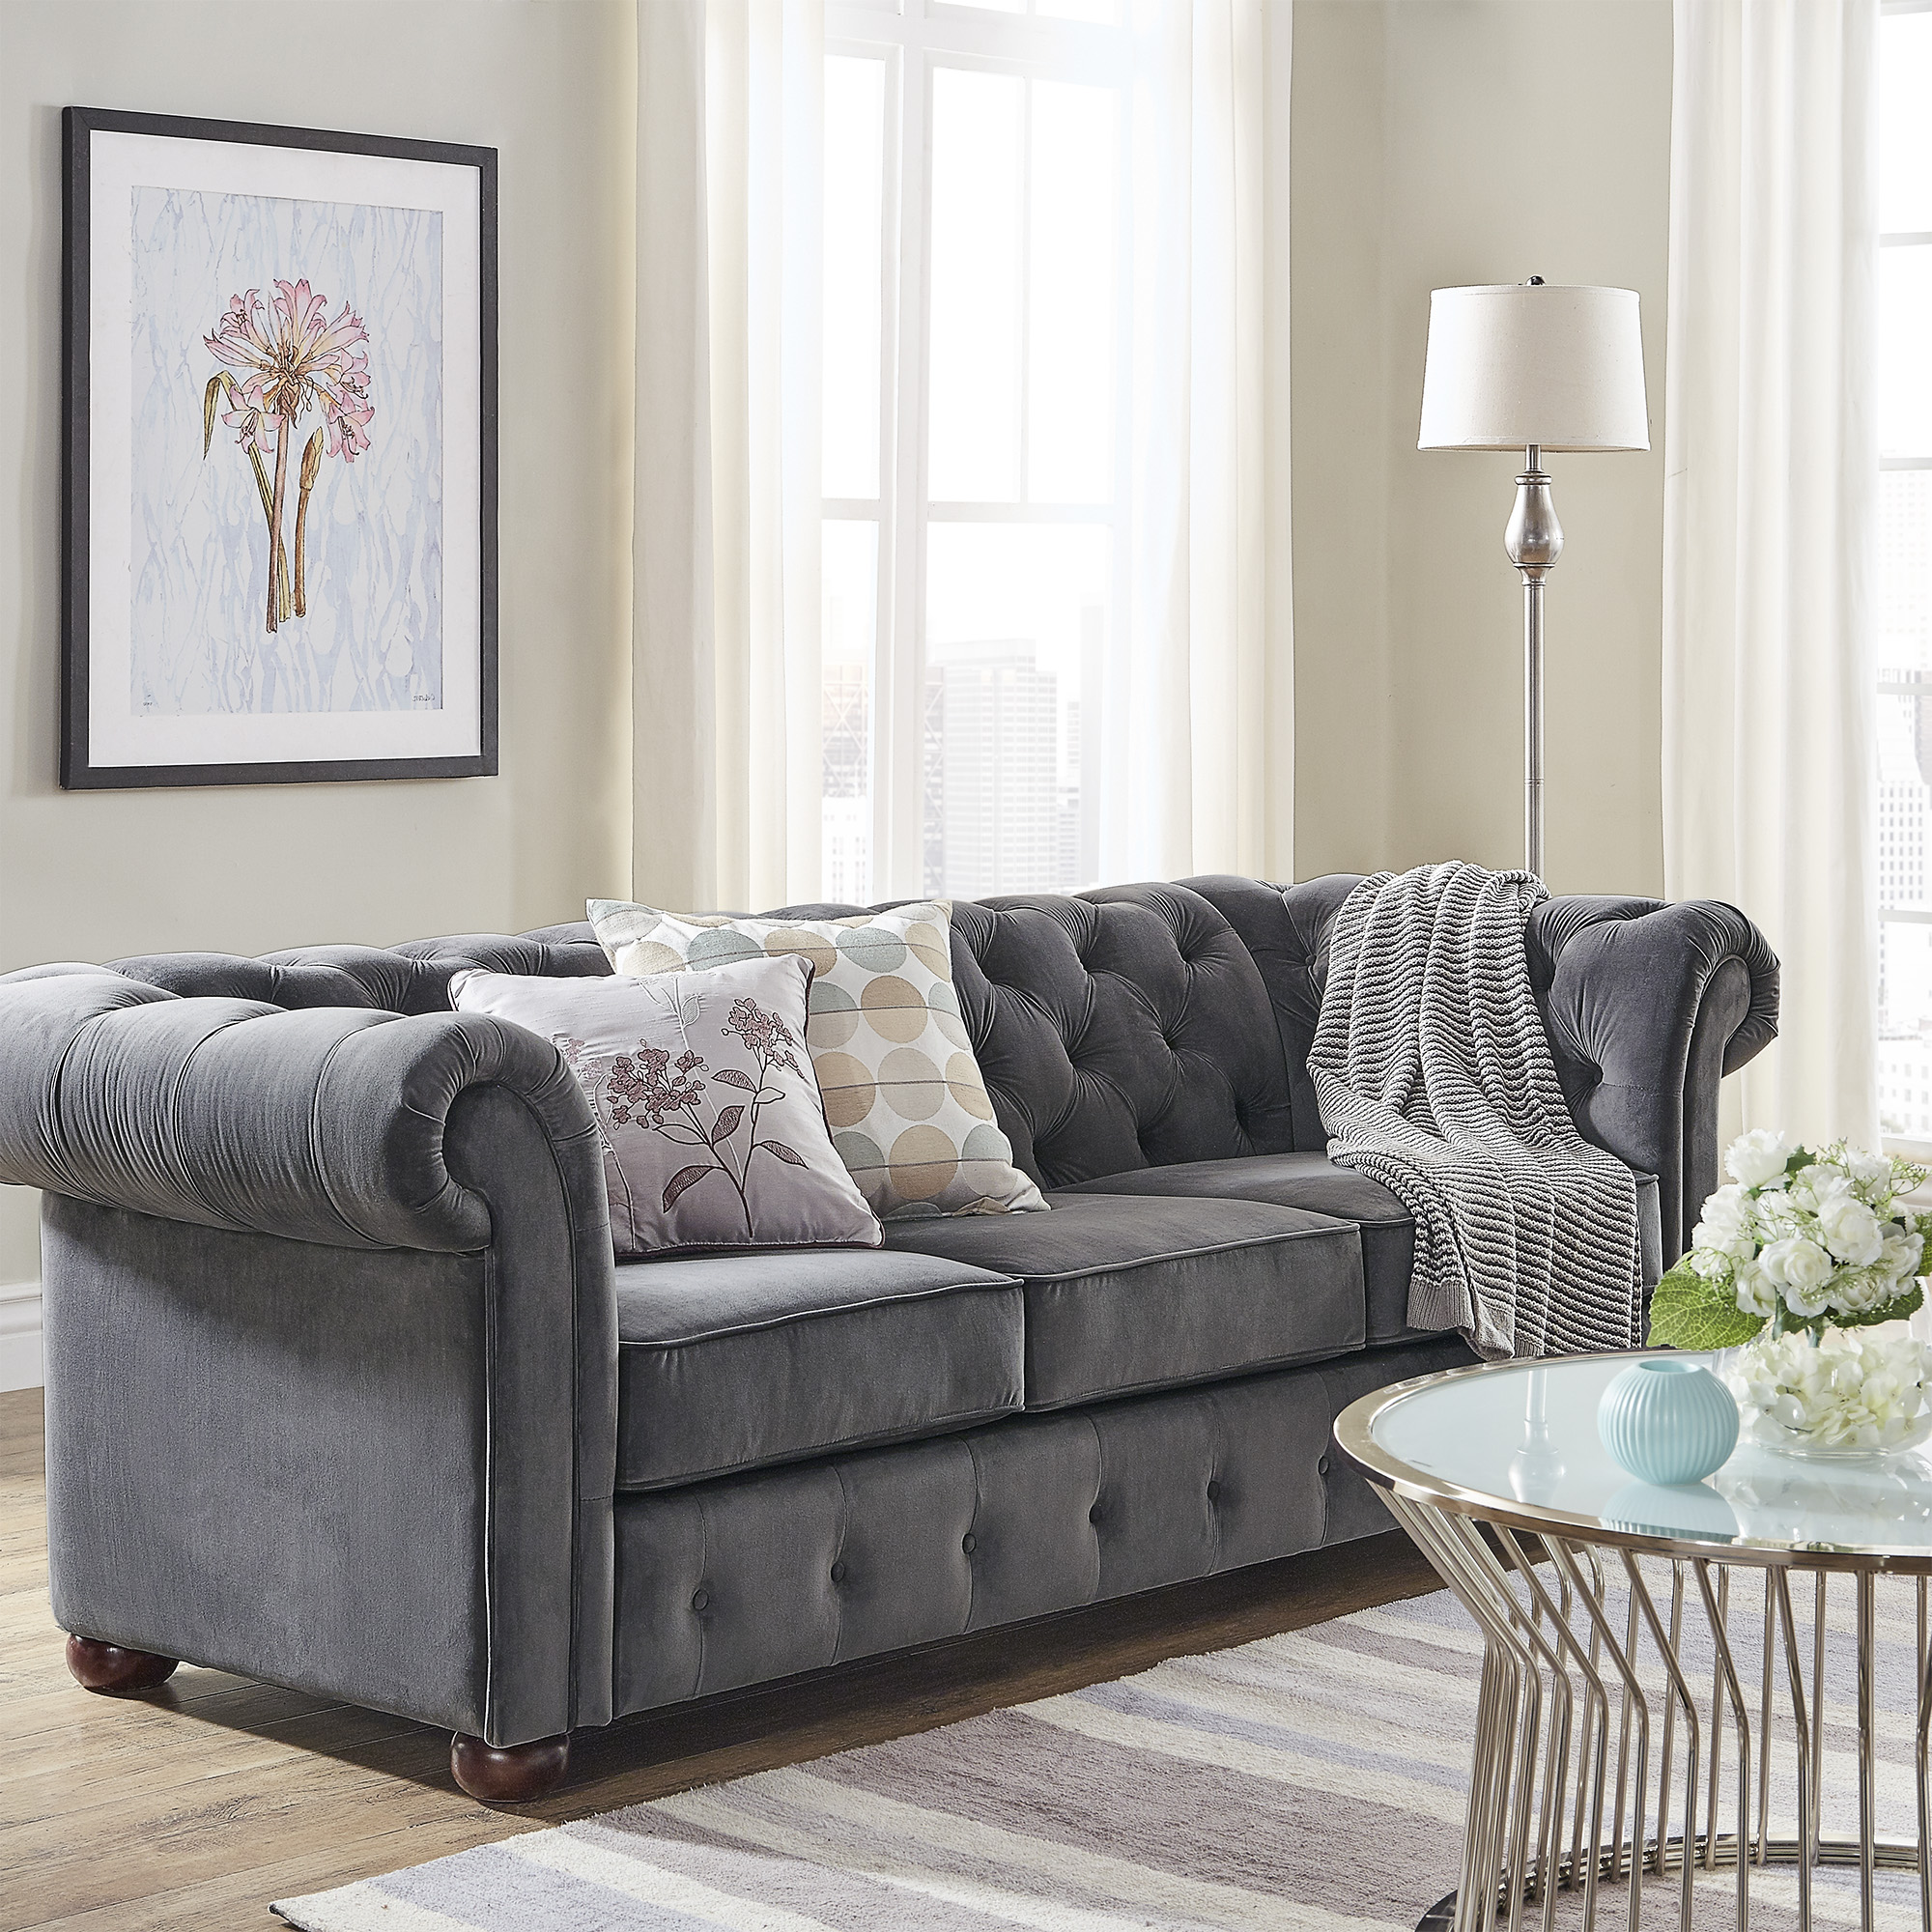 In this guide on how to buy furniture online, we wanted to show the different types of seating you could have in a living space. This image depicts the Dark Grey Velvet Chesterfield Sofa from iNSPIRE Q Artisan.